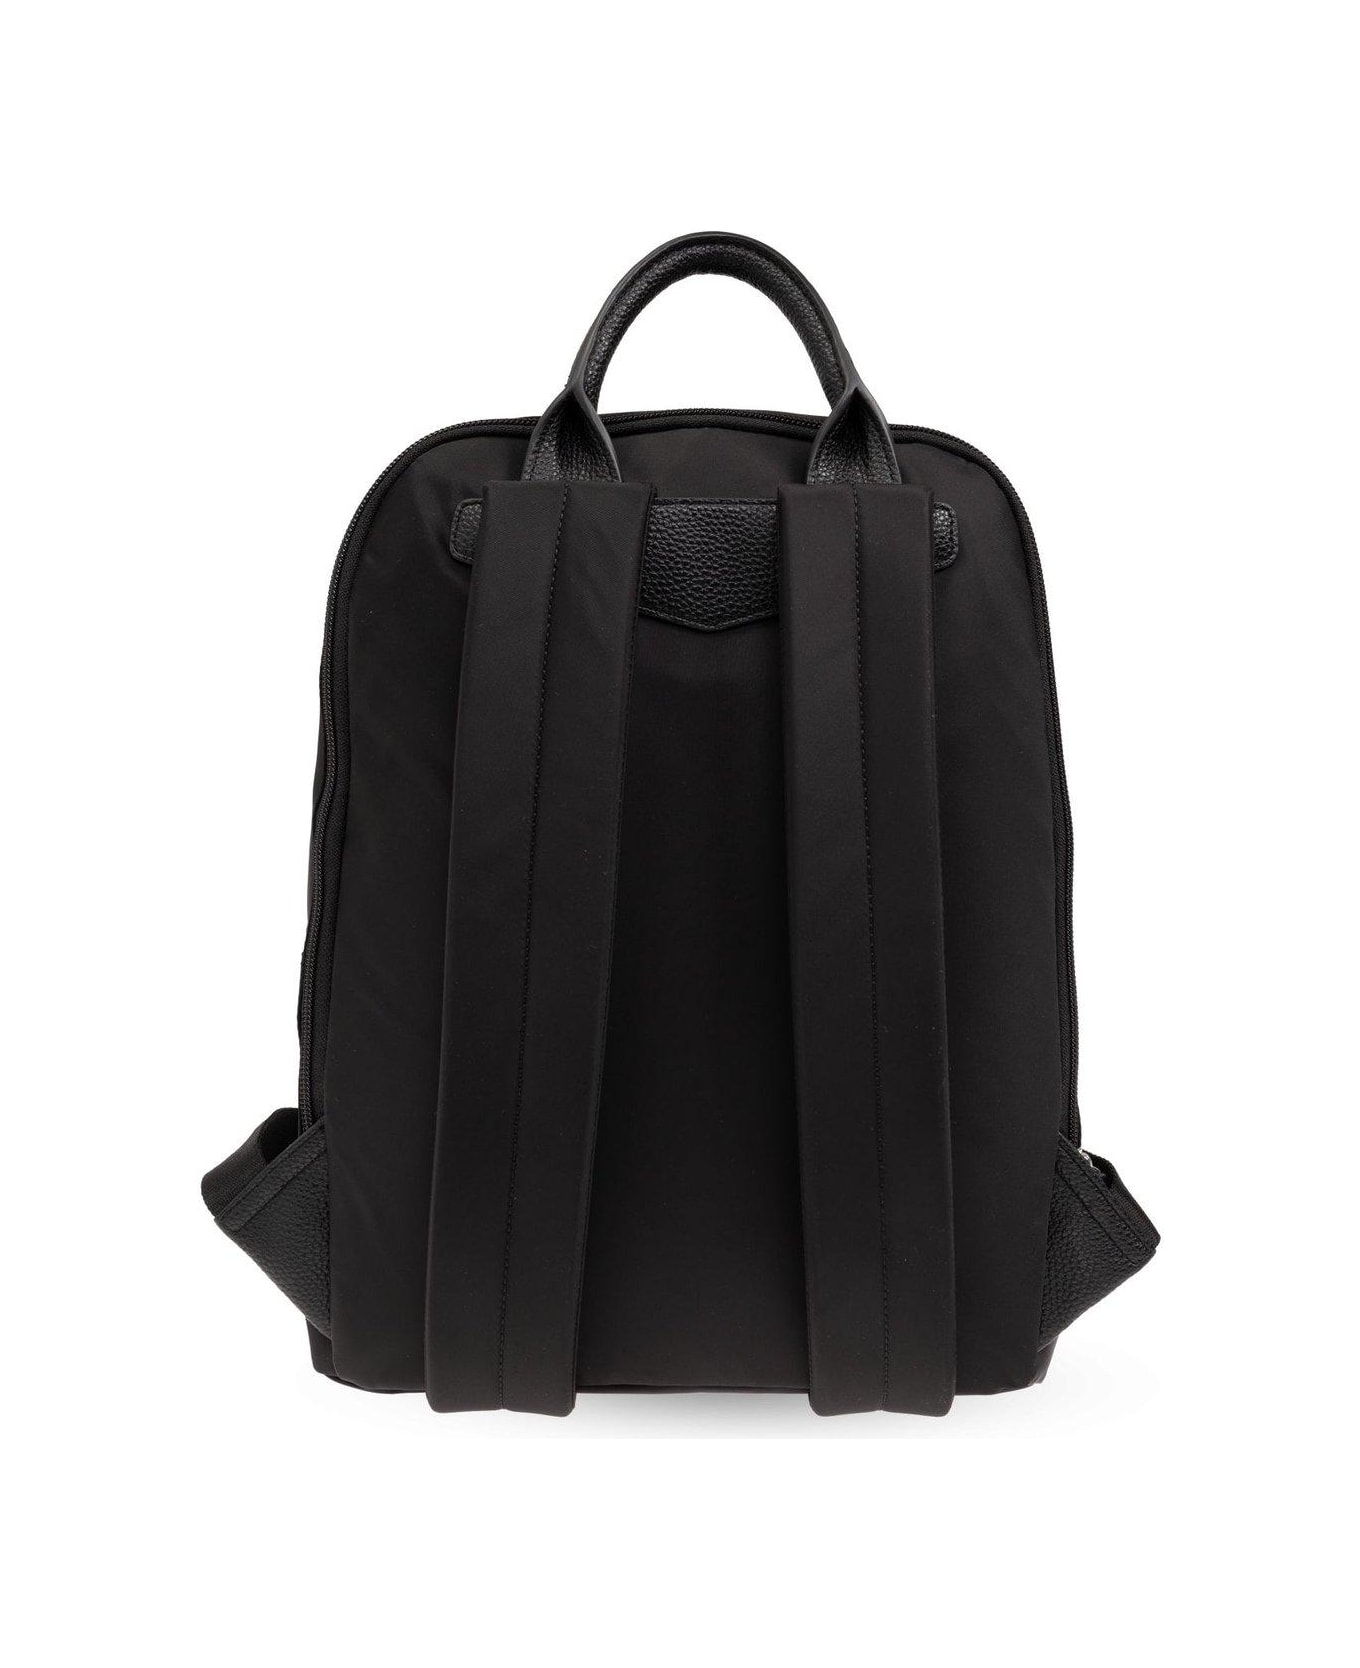 Emporio Armani Sustainable Collection Backpack - Black